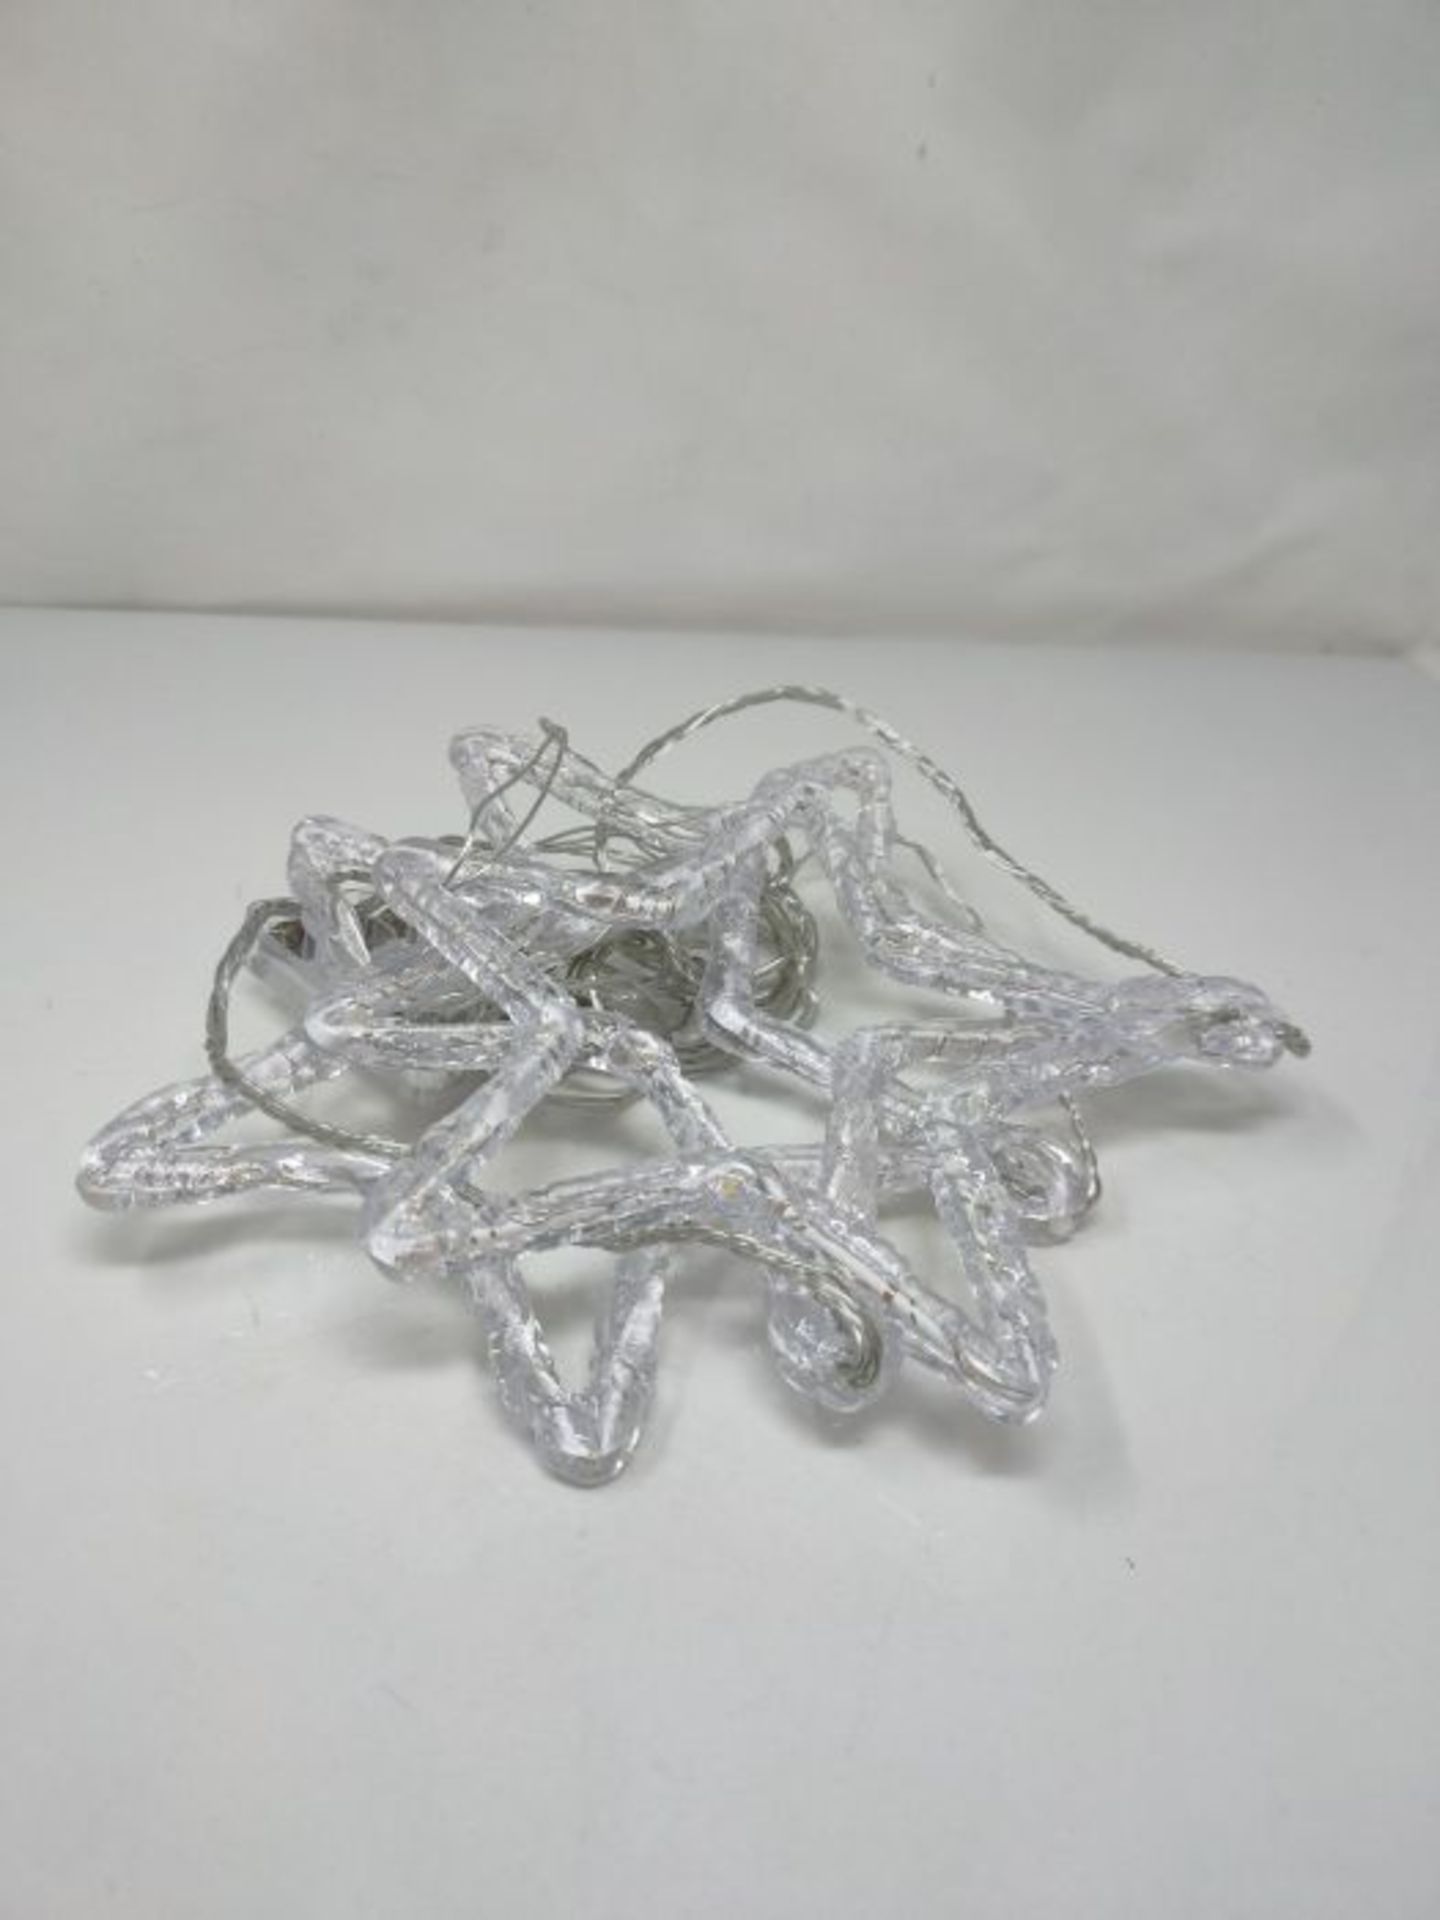 Lights4fun Acrylic Star Hanging Window Light Battery Operated Warm White LEDs Timer - Image 2 of 2